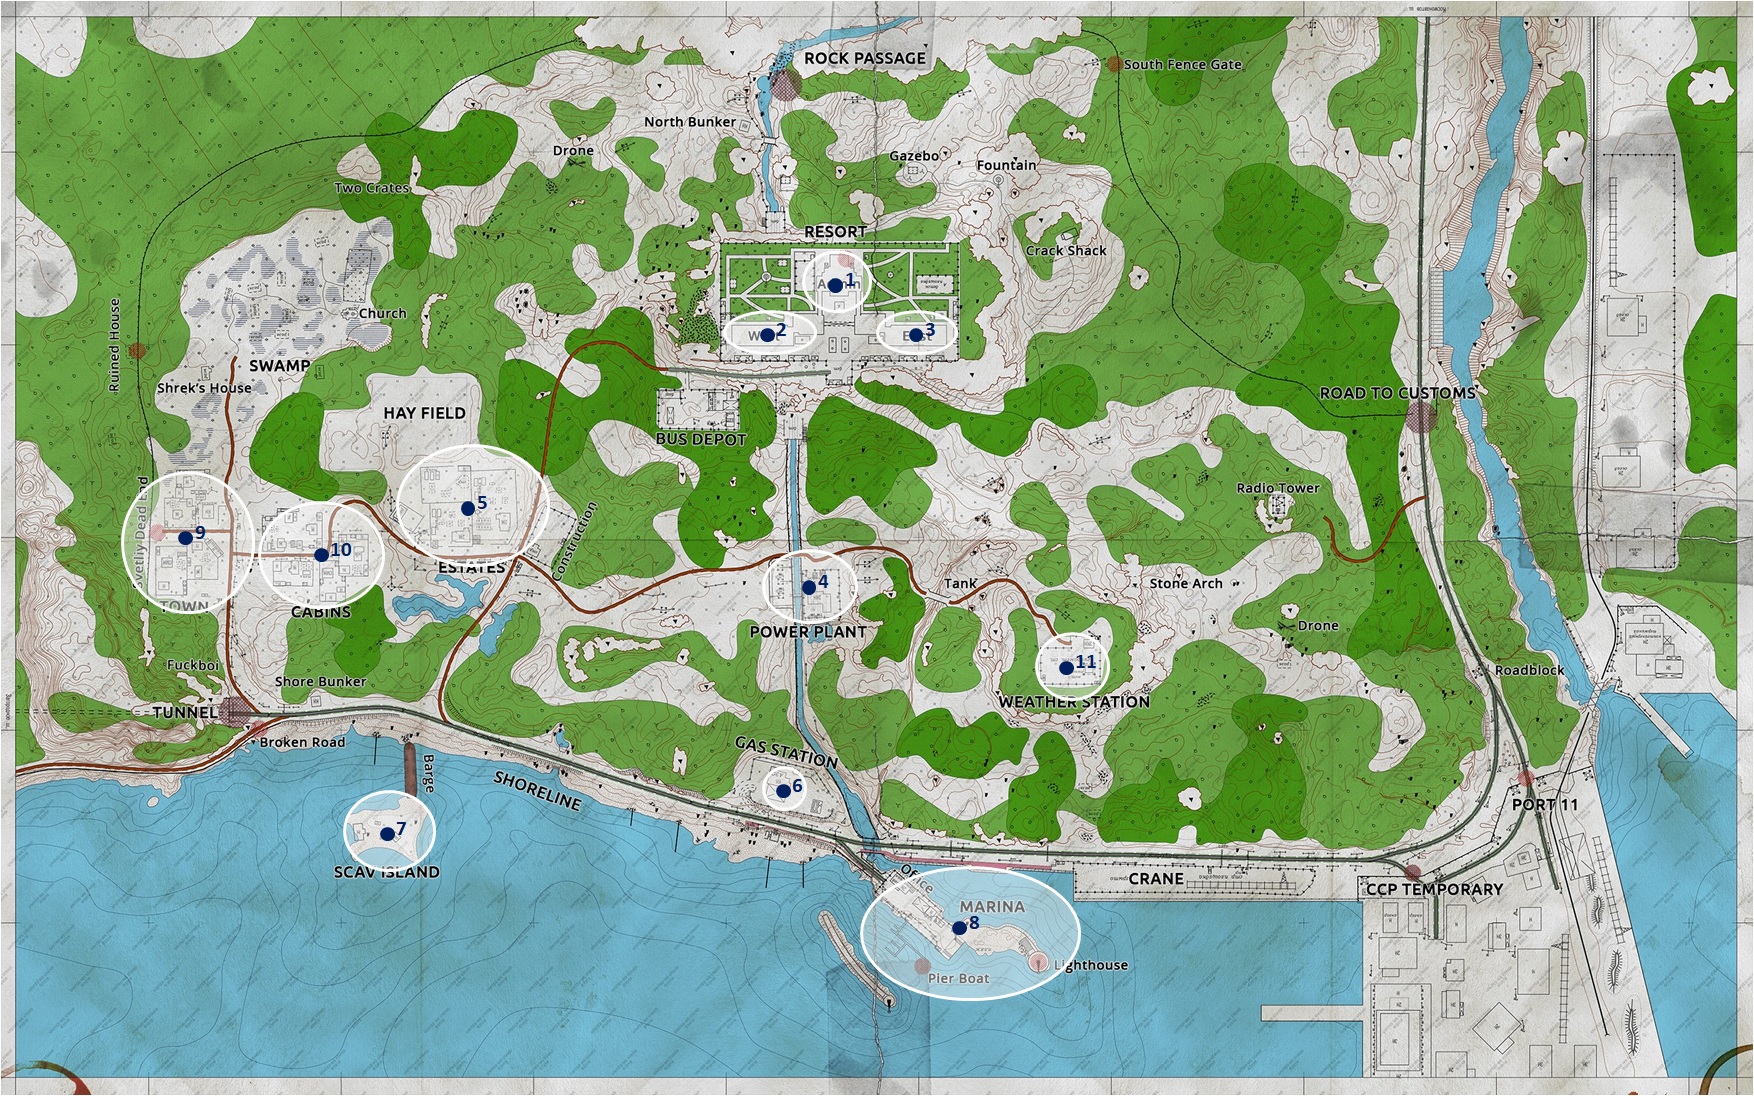 Points of Interest on the Shoreline map